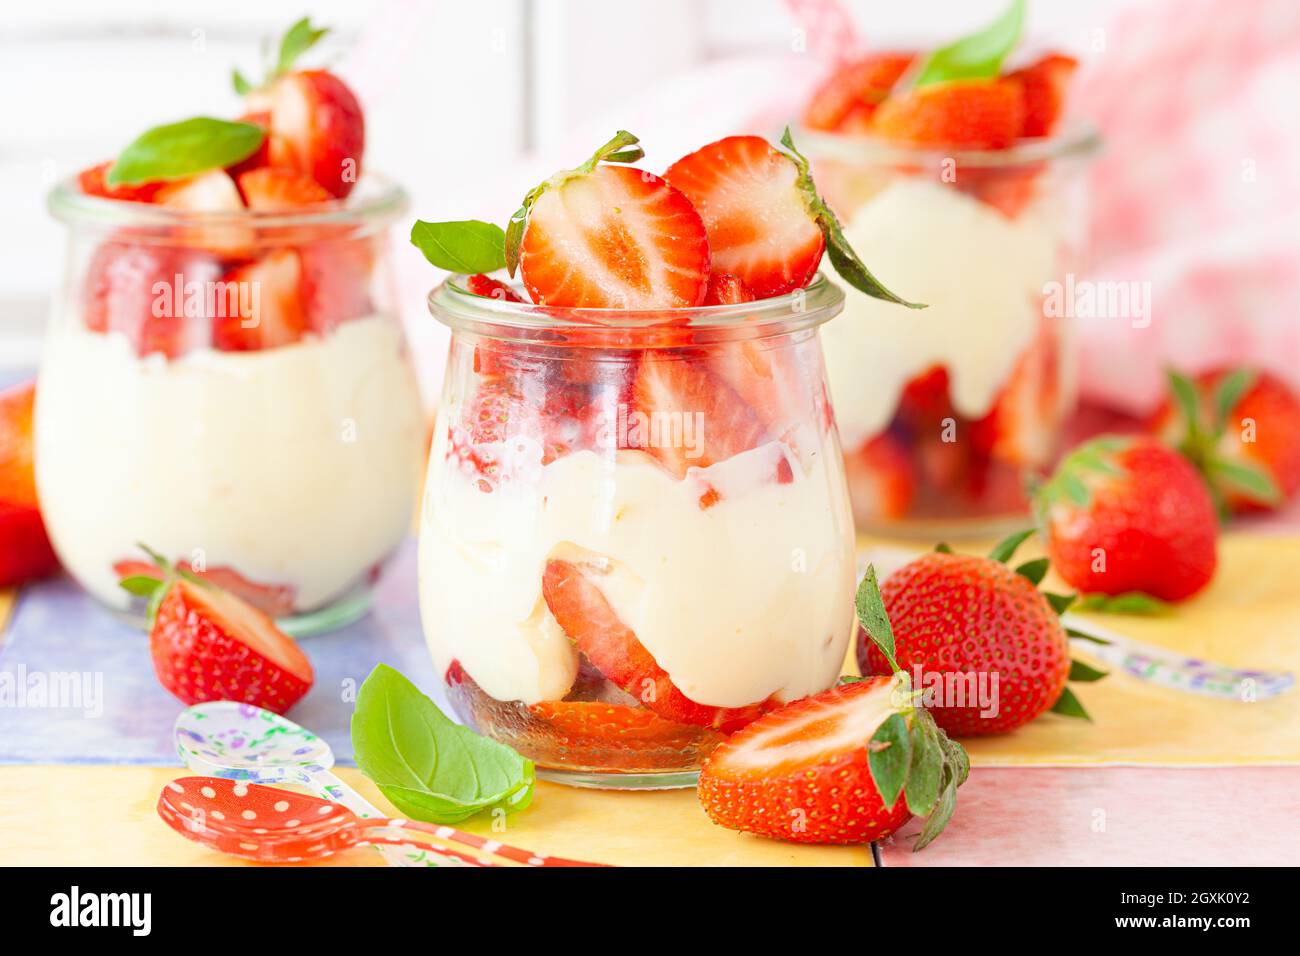 Cream dessert with fresh stawberries and basil Stock Photo